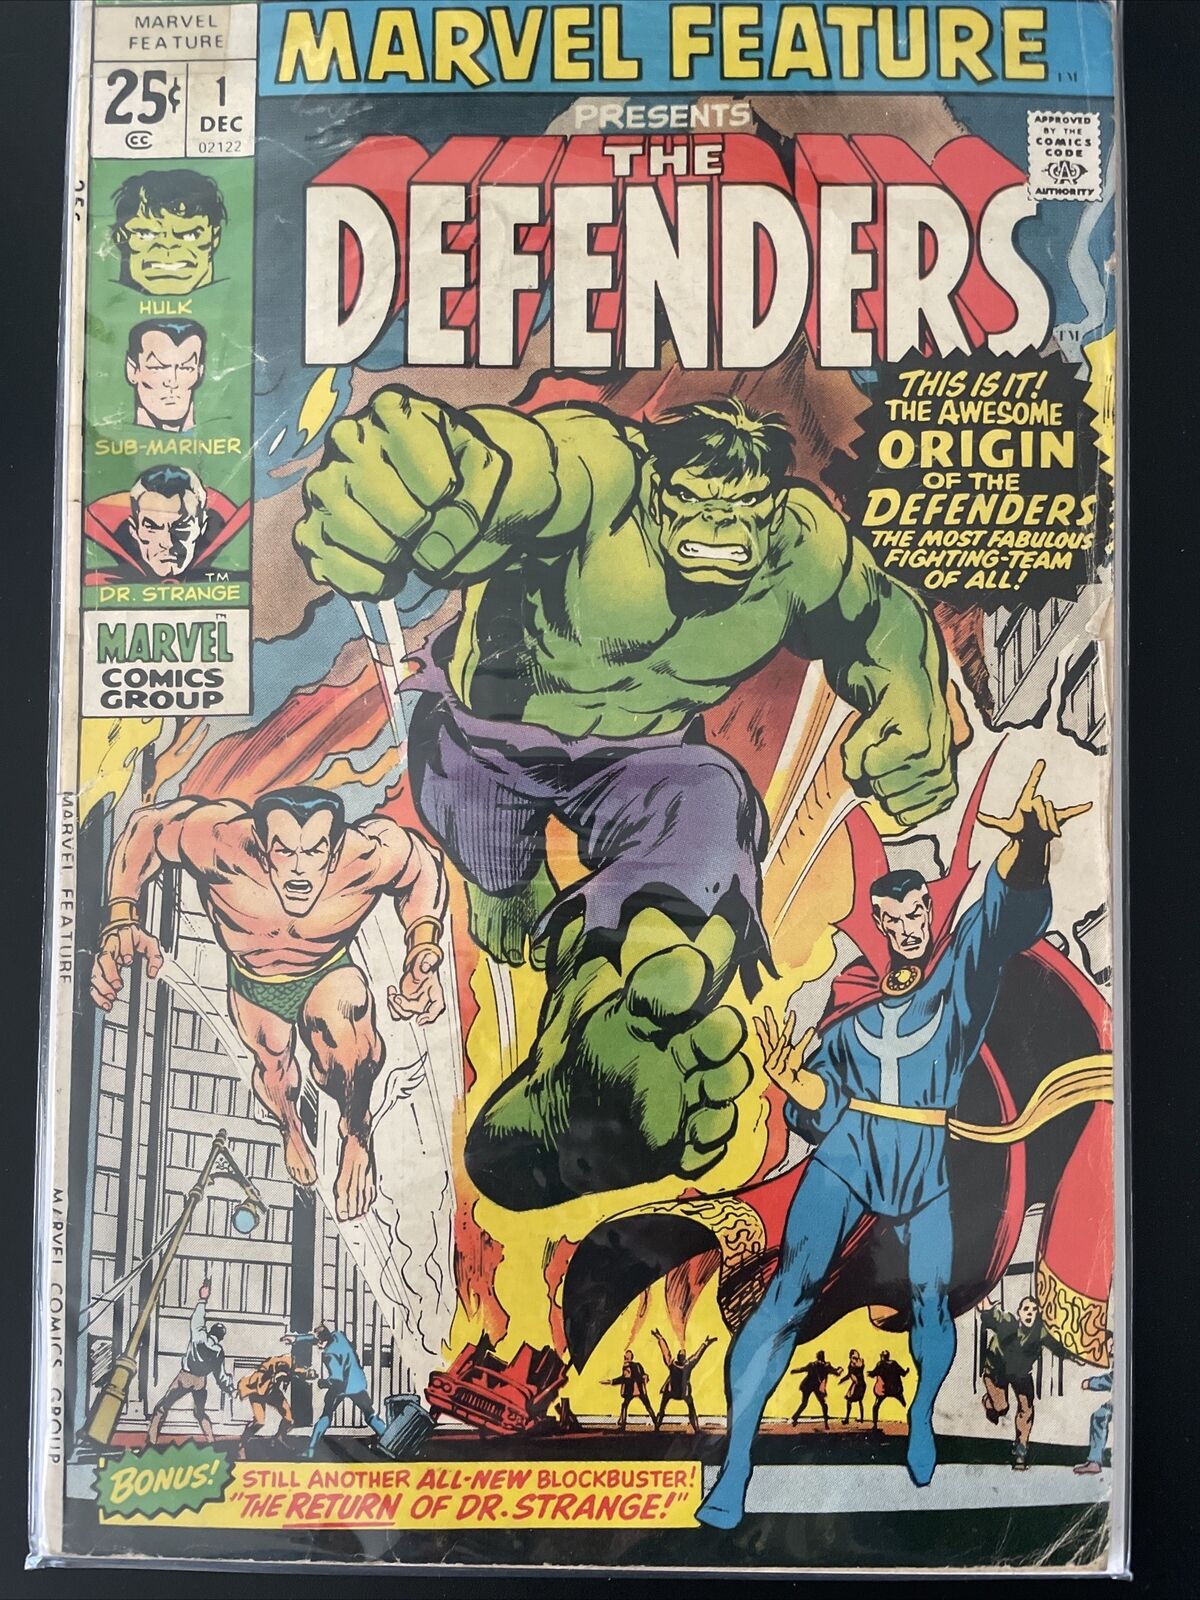 Marvel Feature Presents The Defenders #1 Origin & 1st Appearance